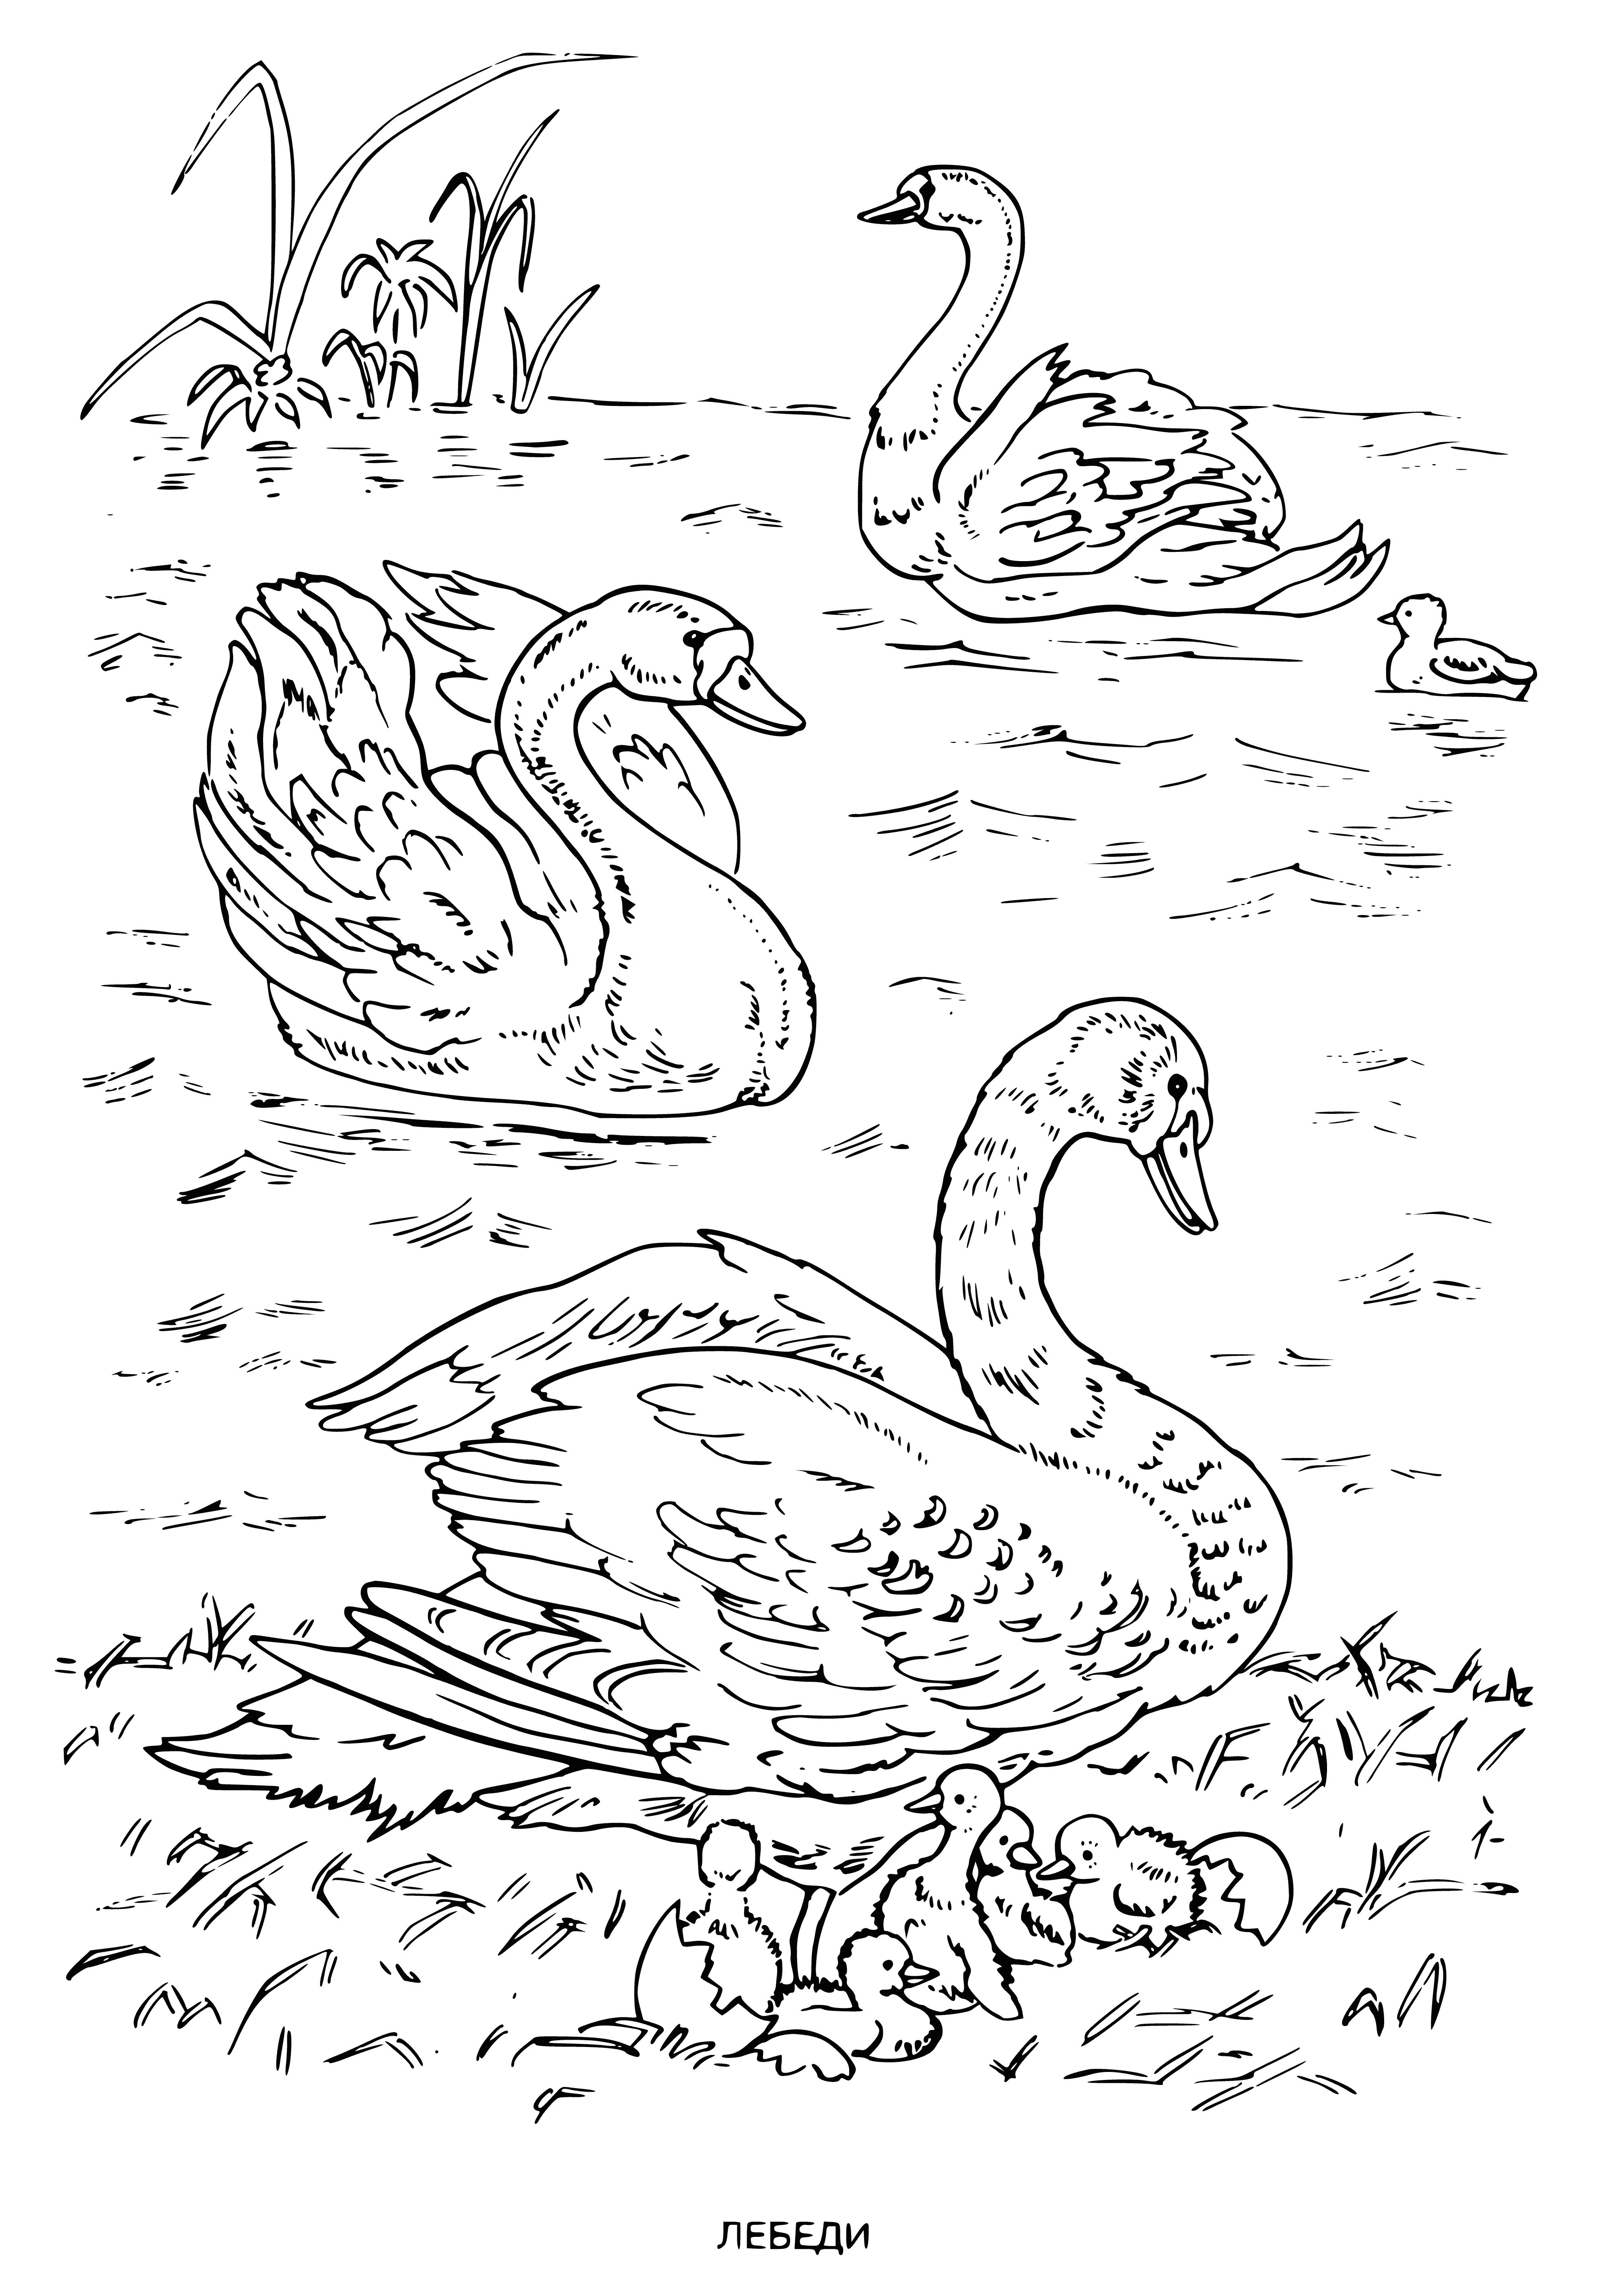 coloring page: Birds in the coloring page are graceful swans, white and with long necks, swimming in a peaceful pond.